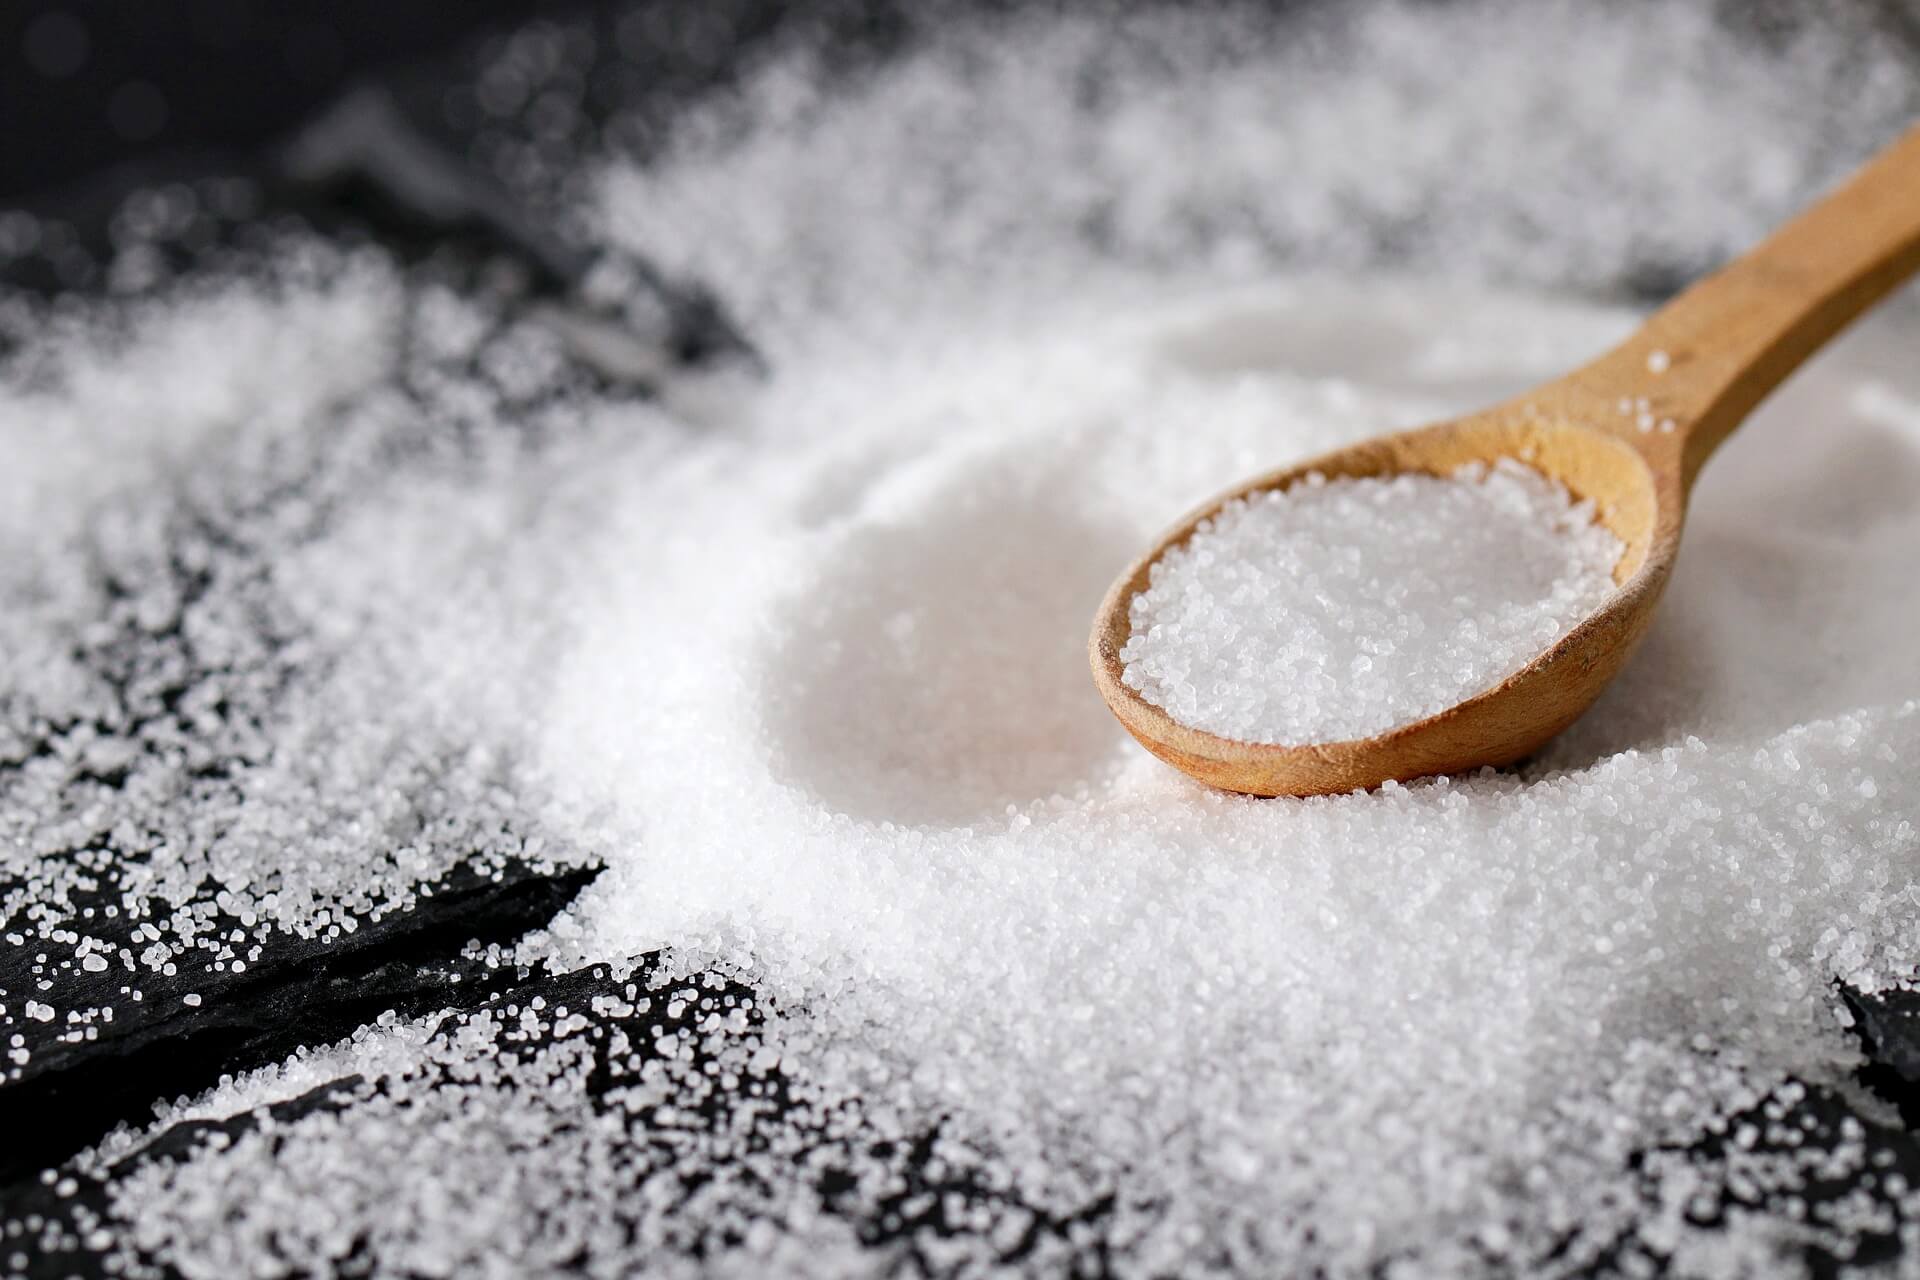 Photo: A small wooden spoon full of salt rests in a small pile of salt.